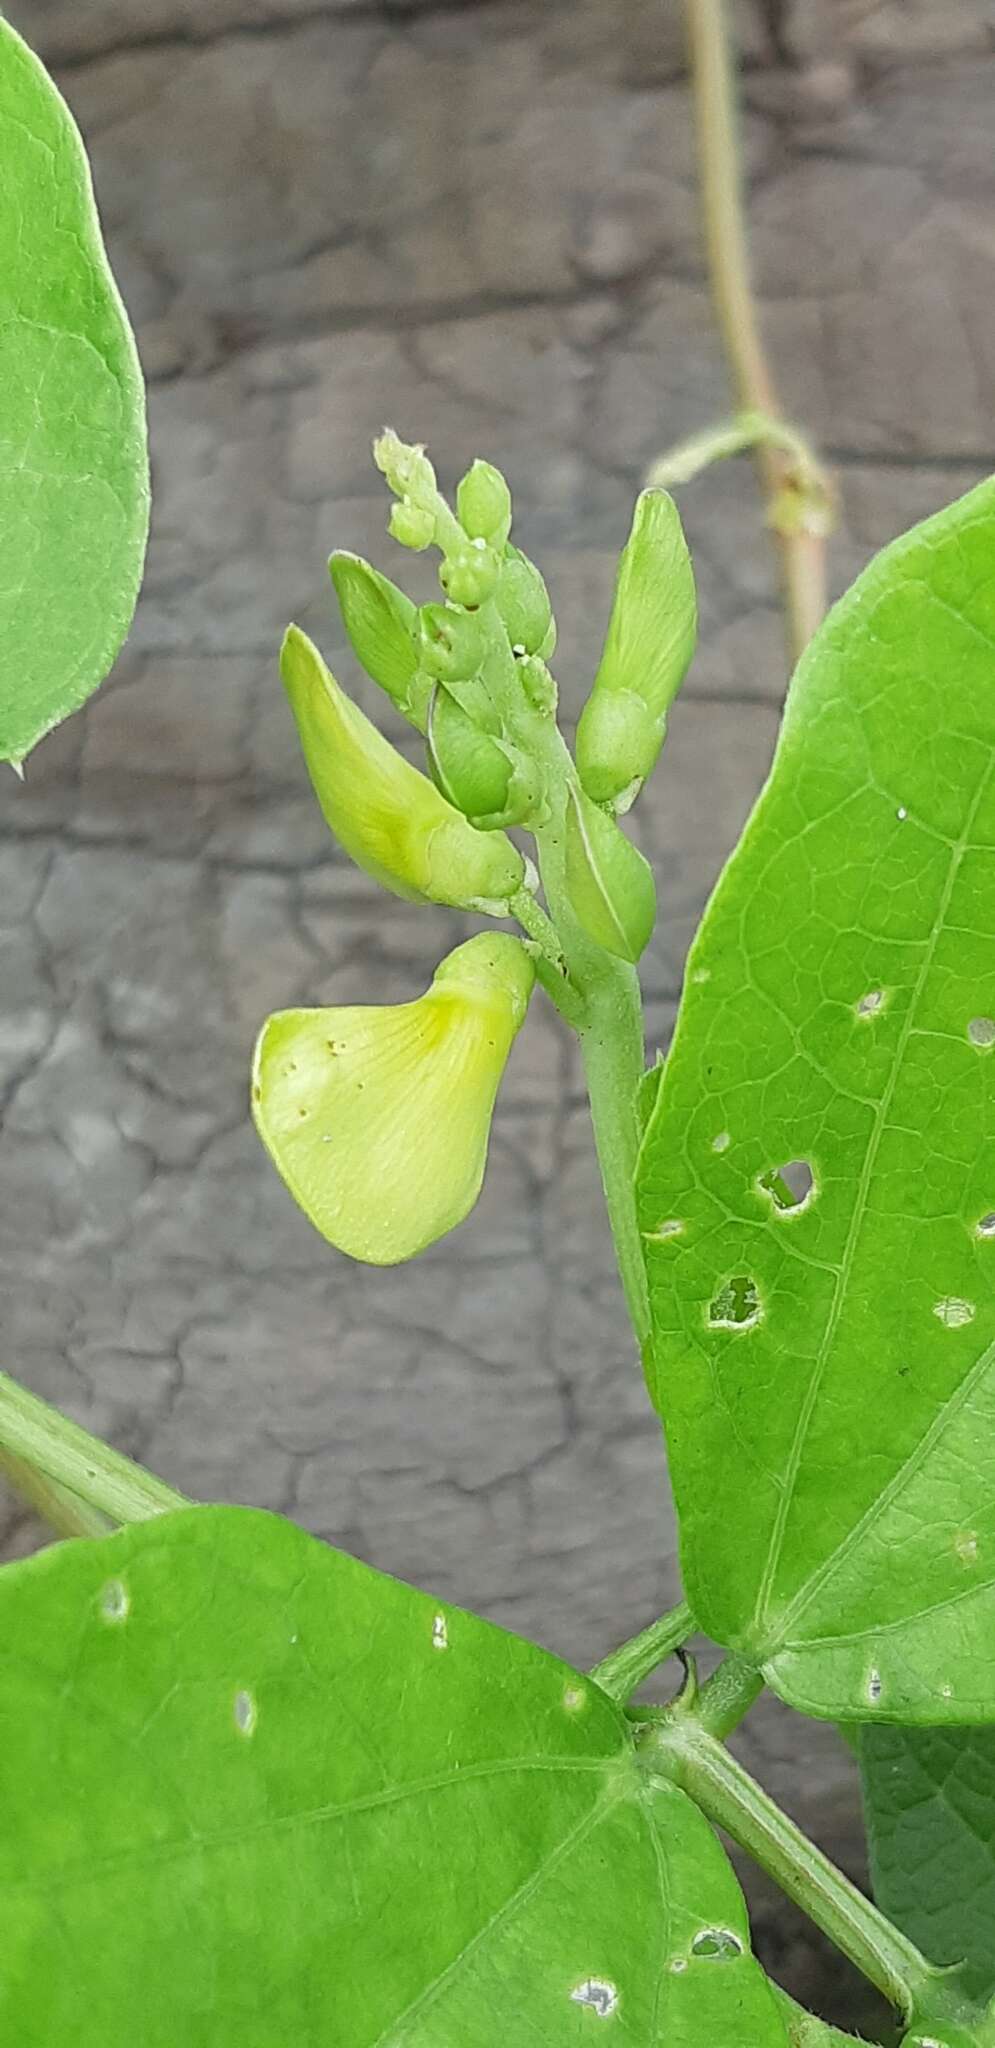 Image of notched cowpea